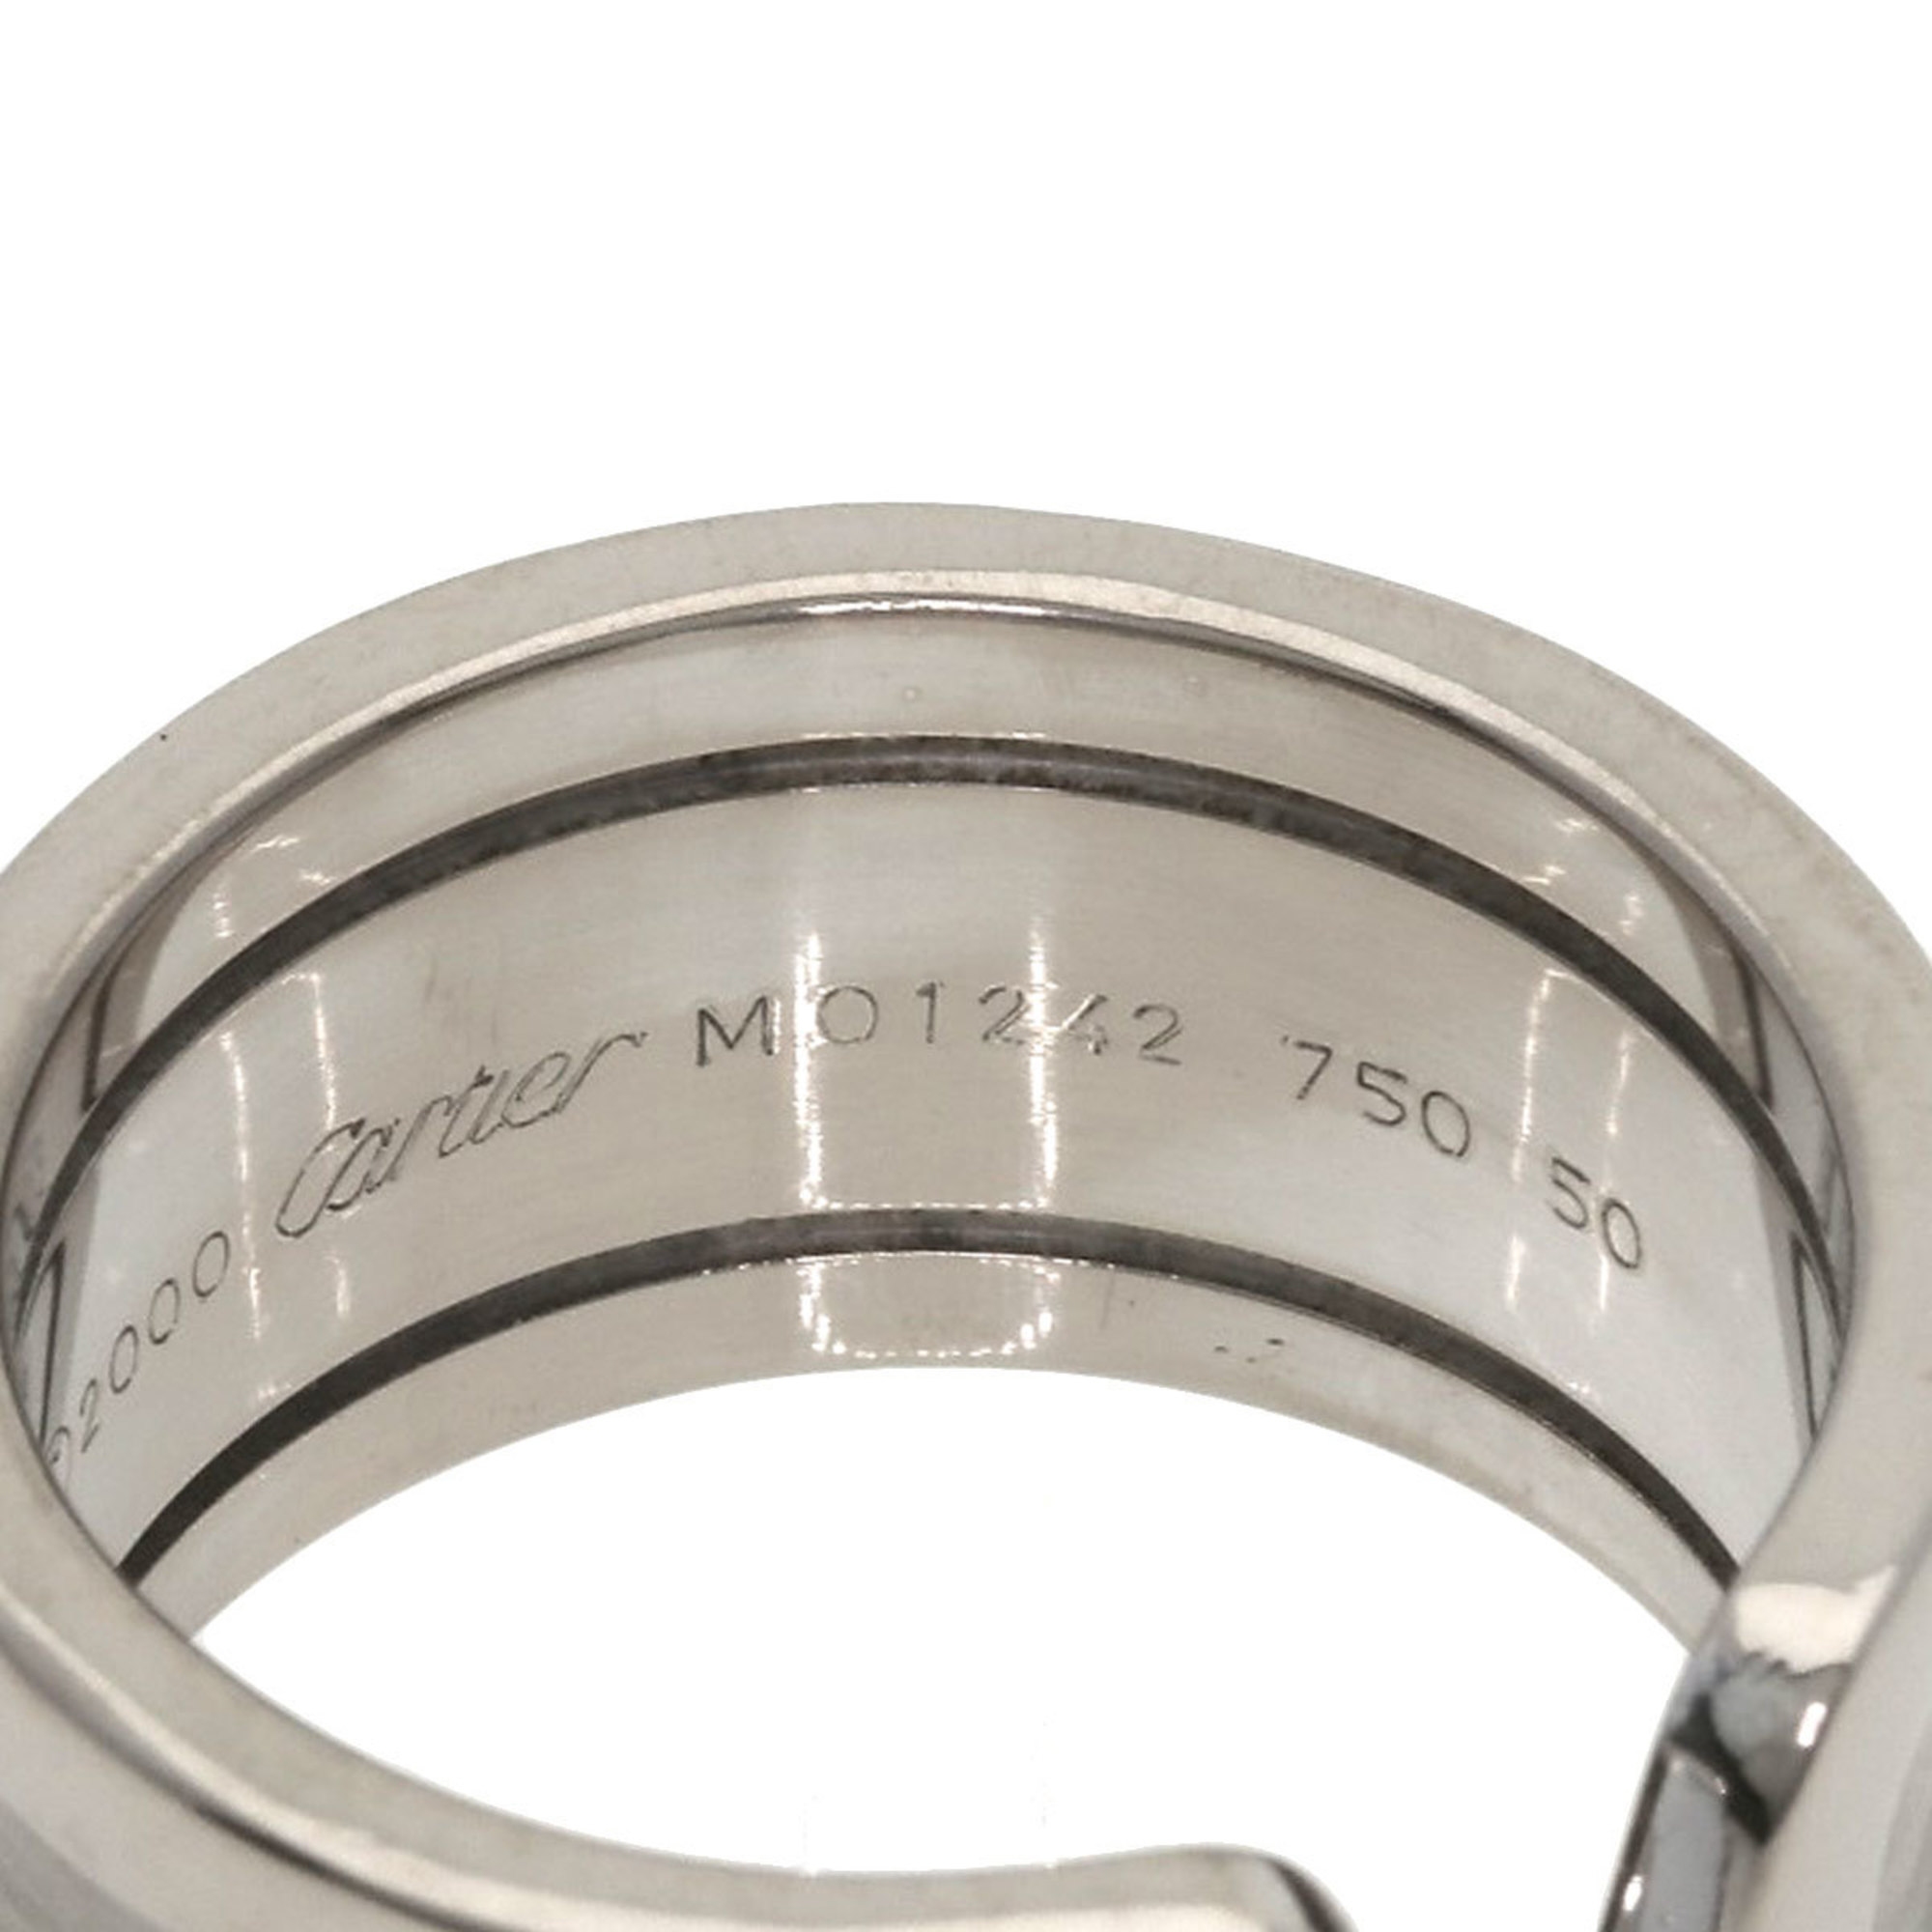 Cartier C2 Ring LM #50 Ring, 18K White Gold, Women's, CARTIER